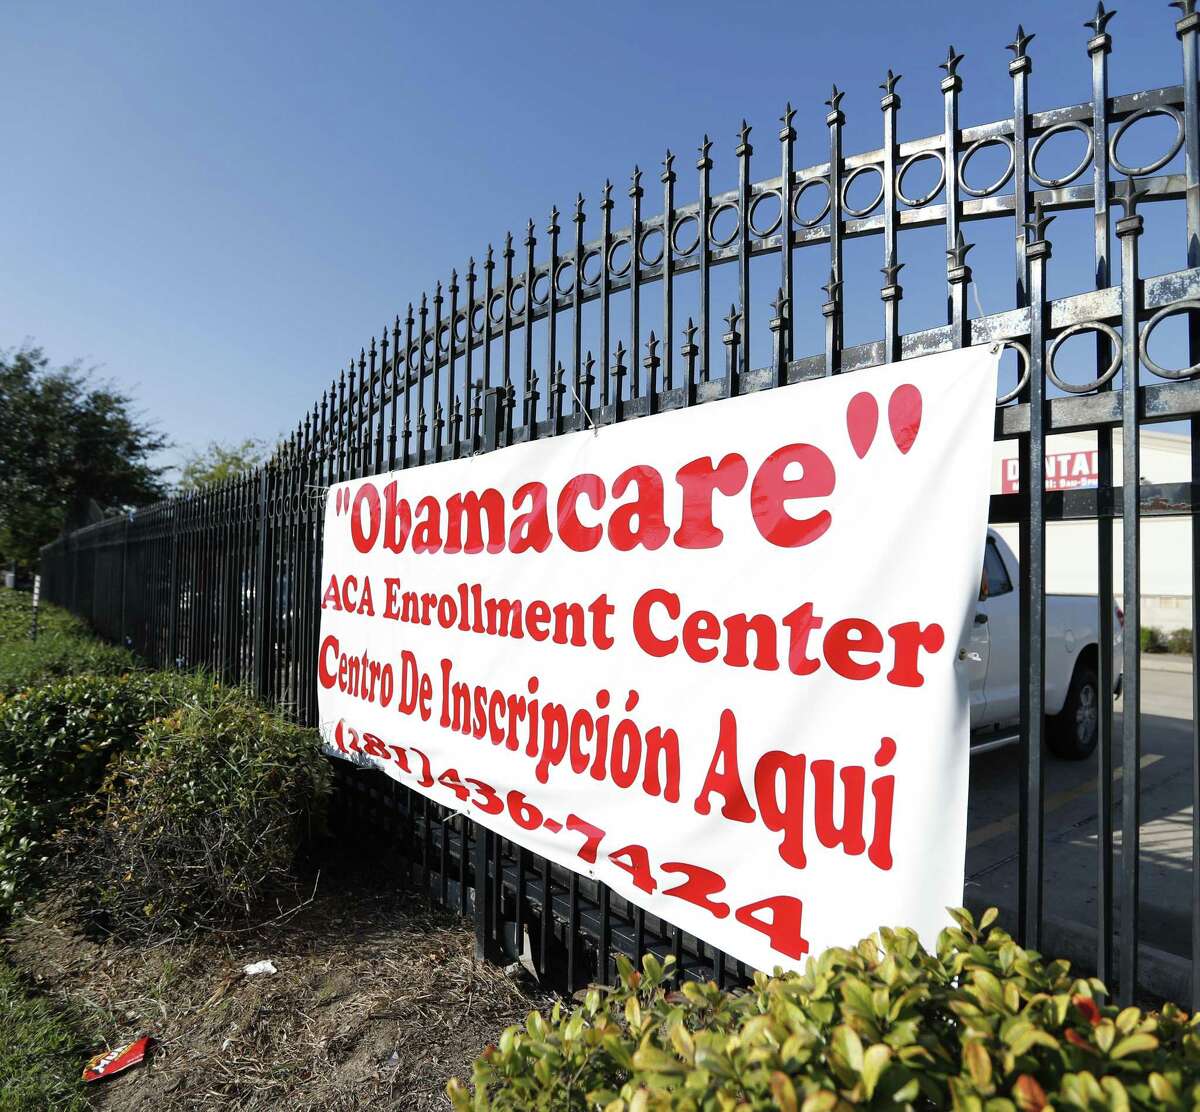 ACA Health Experts sign to help people get Obamacare hangs outside of the Ahmed and Roshan Virani Children's Clinic, Monday, Nov. 14, 2016 in Houston. For 2020, Oscar, a tech-driven insurance company, will offer plans in Houston on the ACA exchange for the first time. (K aren Warren / Houston Chronicle )